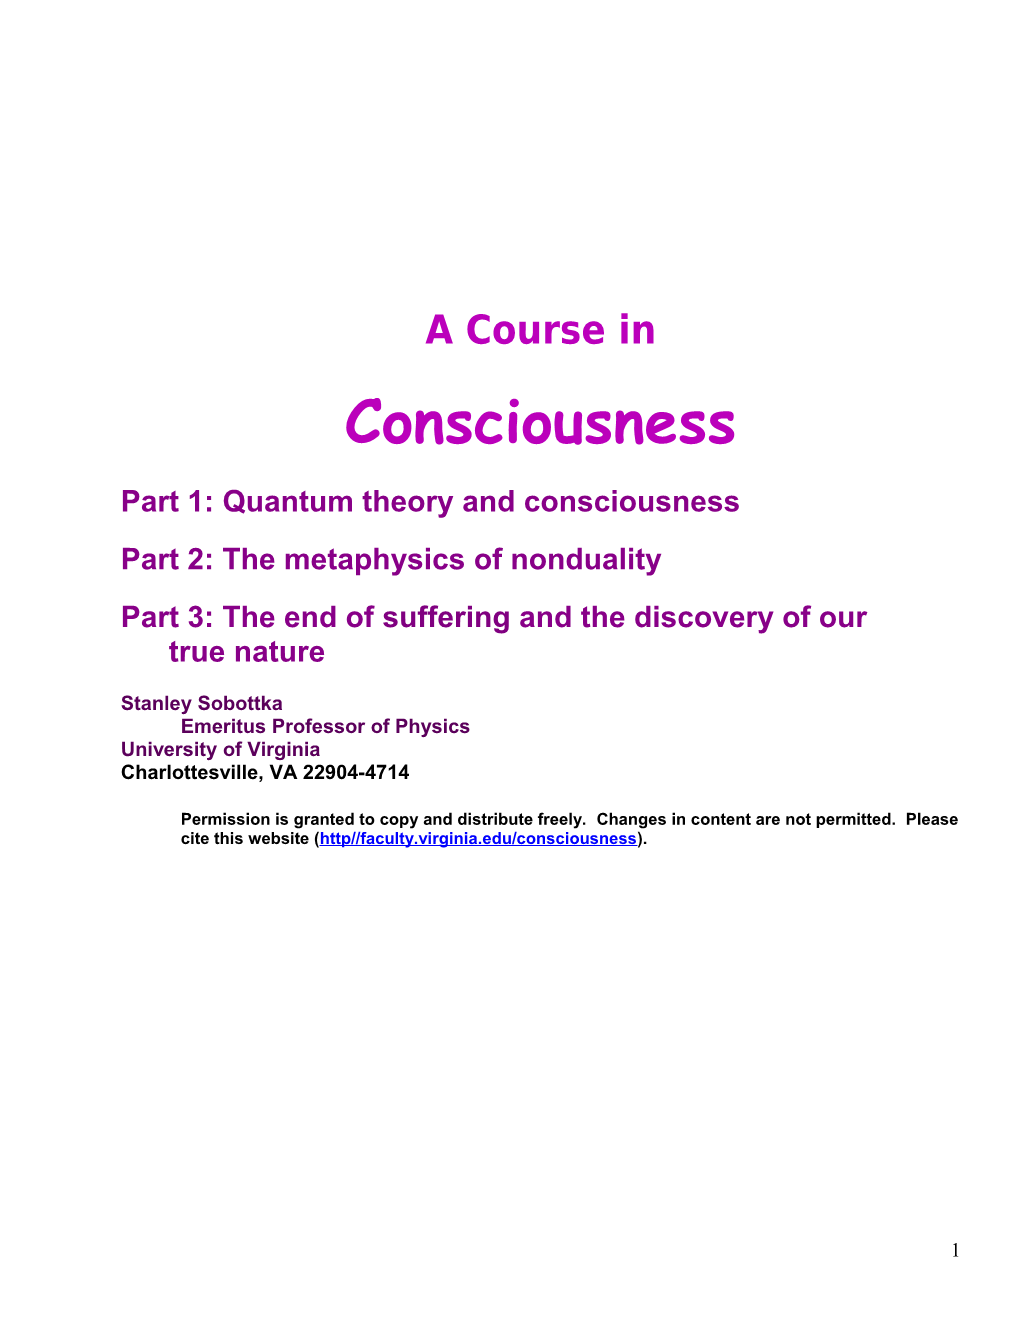 Part 1: Quantum Theory and Consciousness